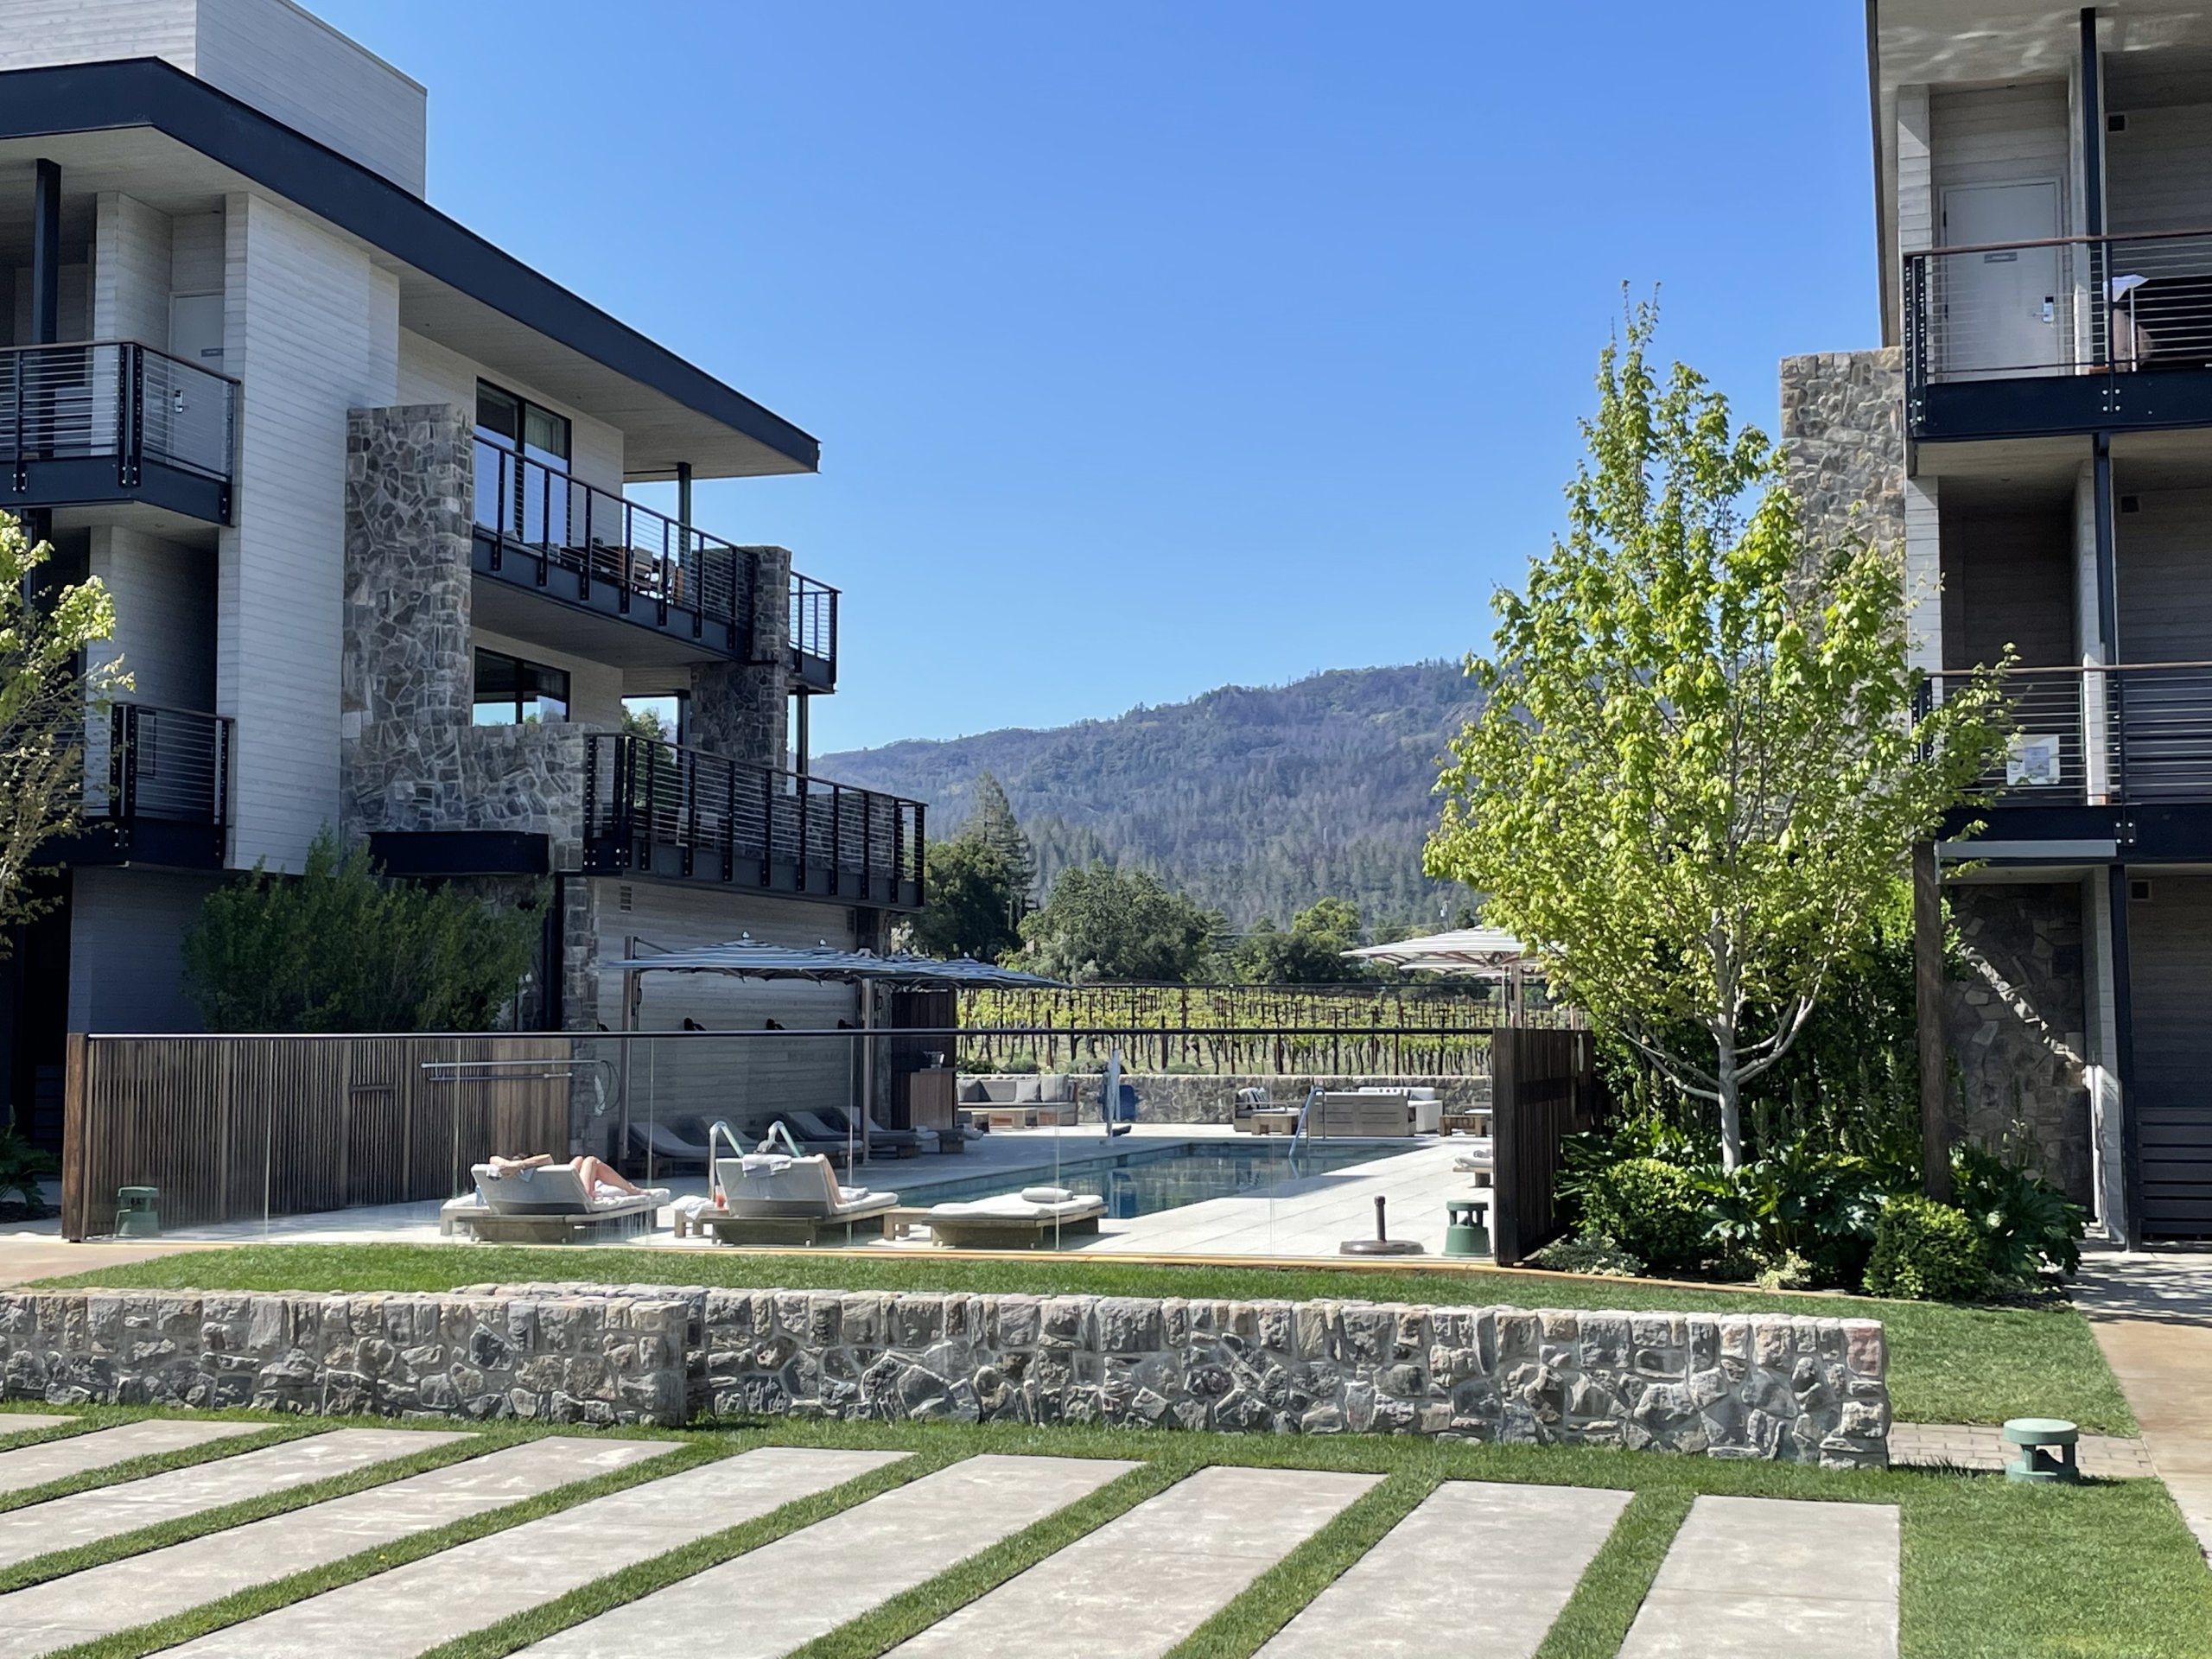 hotel, pool area and vineyards